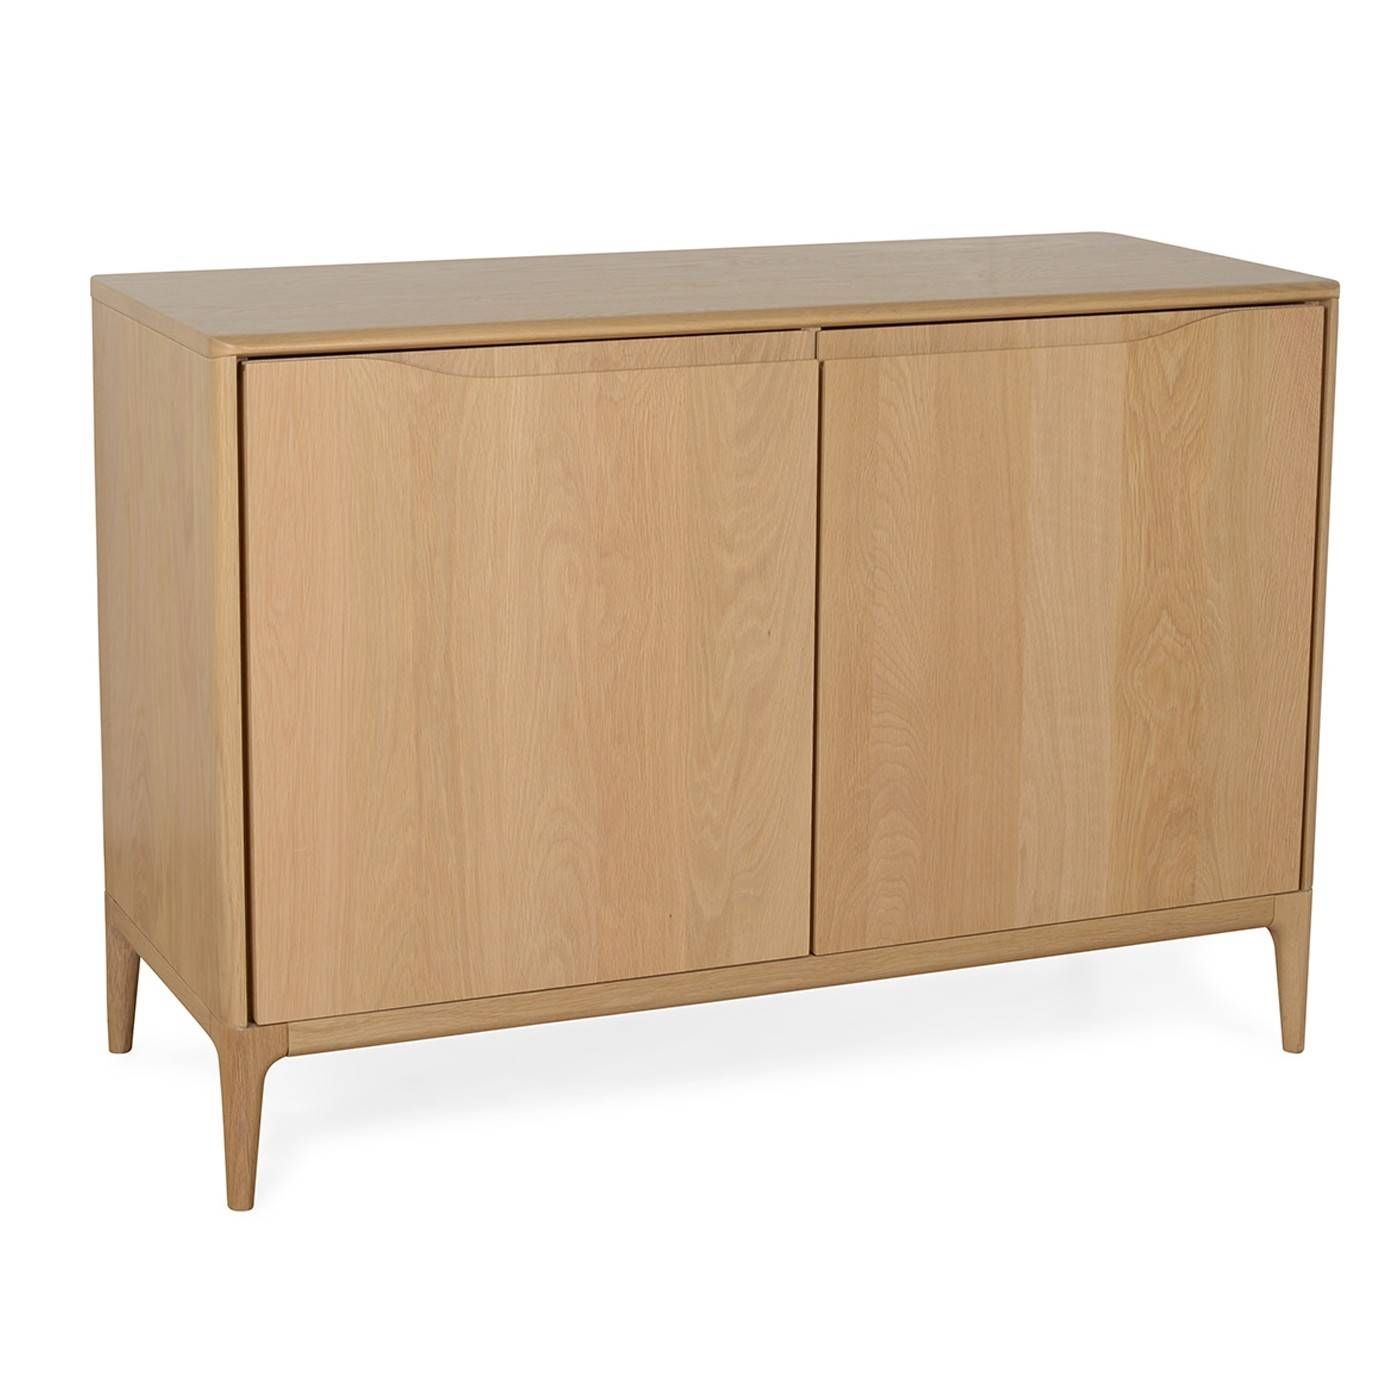 Light Wood Sideboards | Designer Contemporary Sideboards | Heal's Intended For Light Wood Sideboards (Photo 2 of 30)